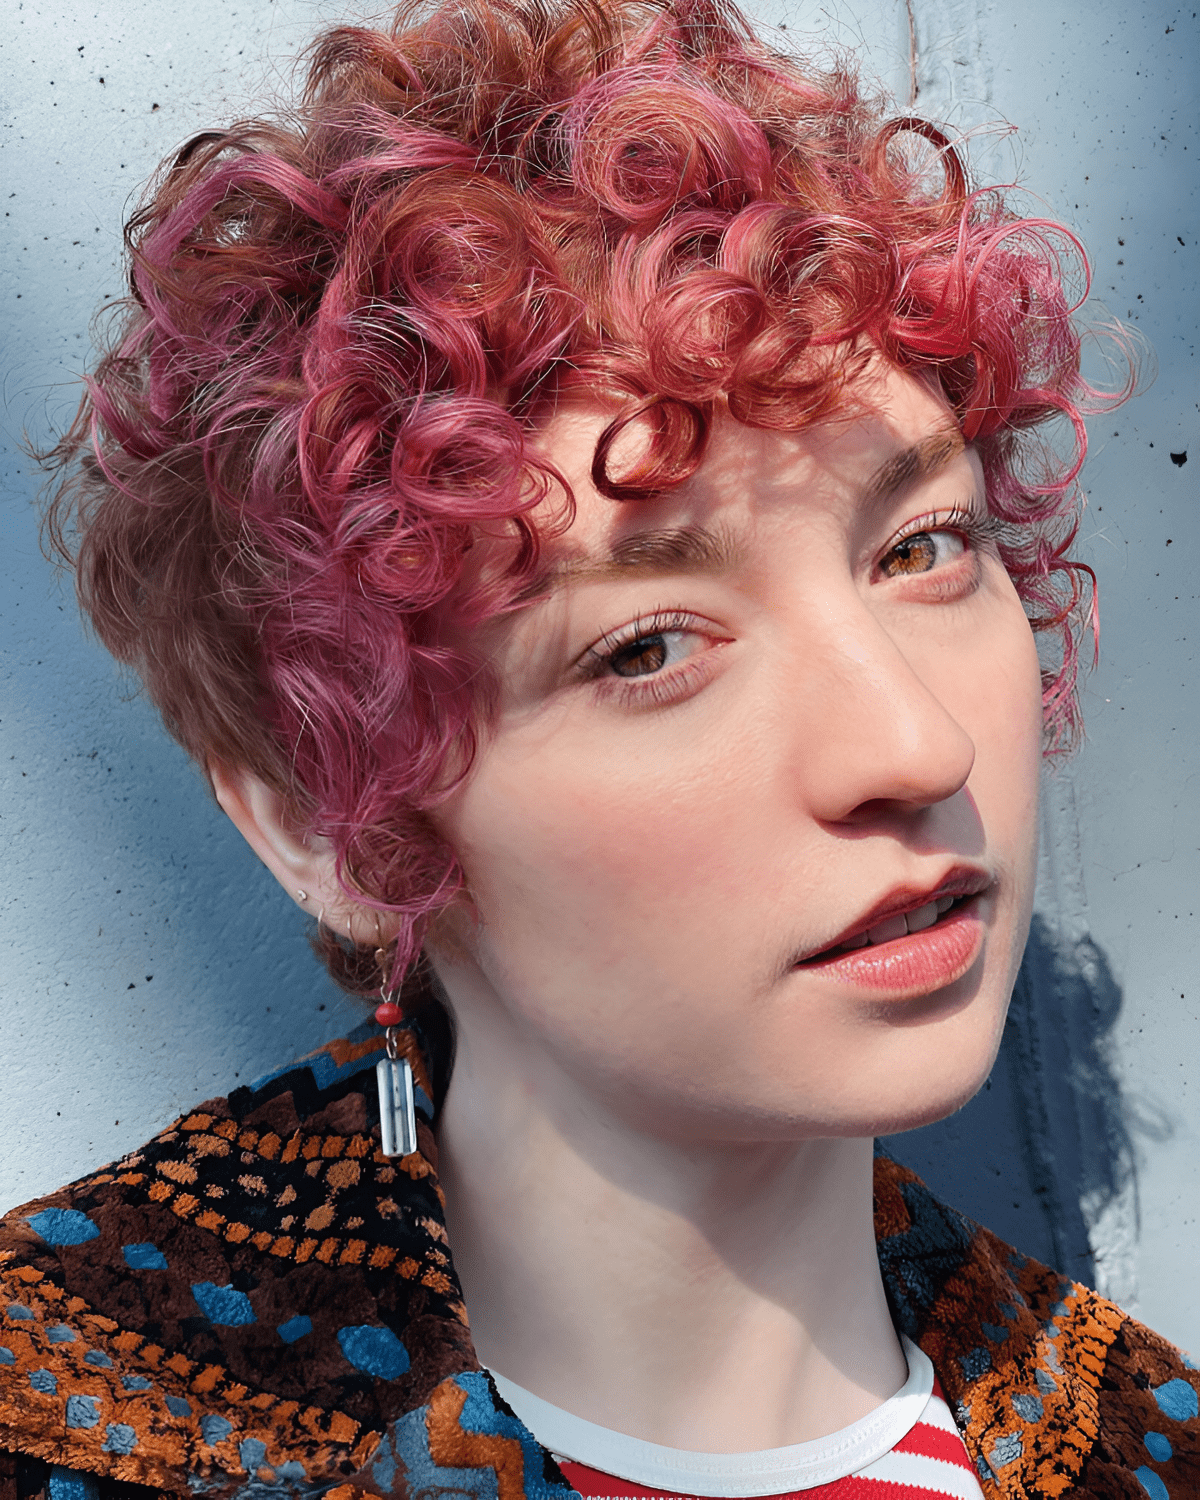 vibrant curls of whimsy